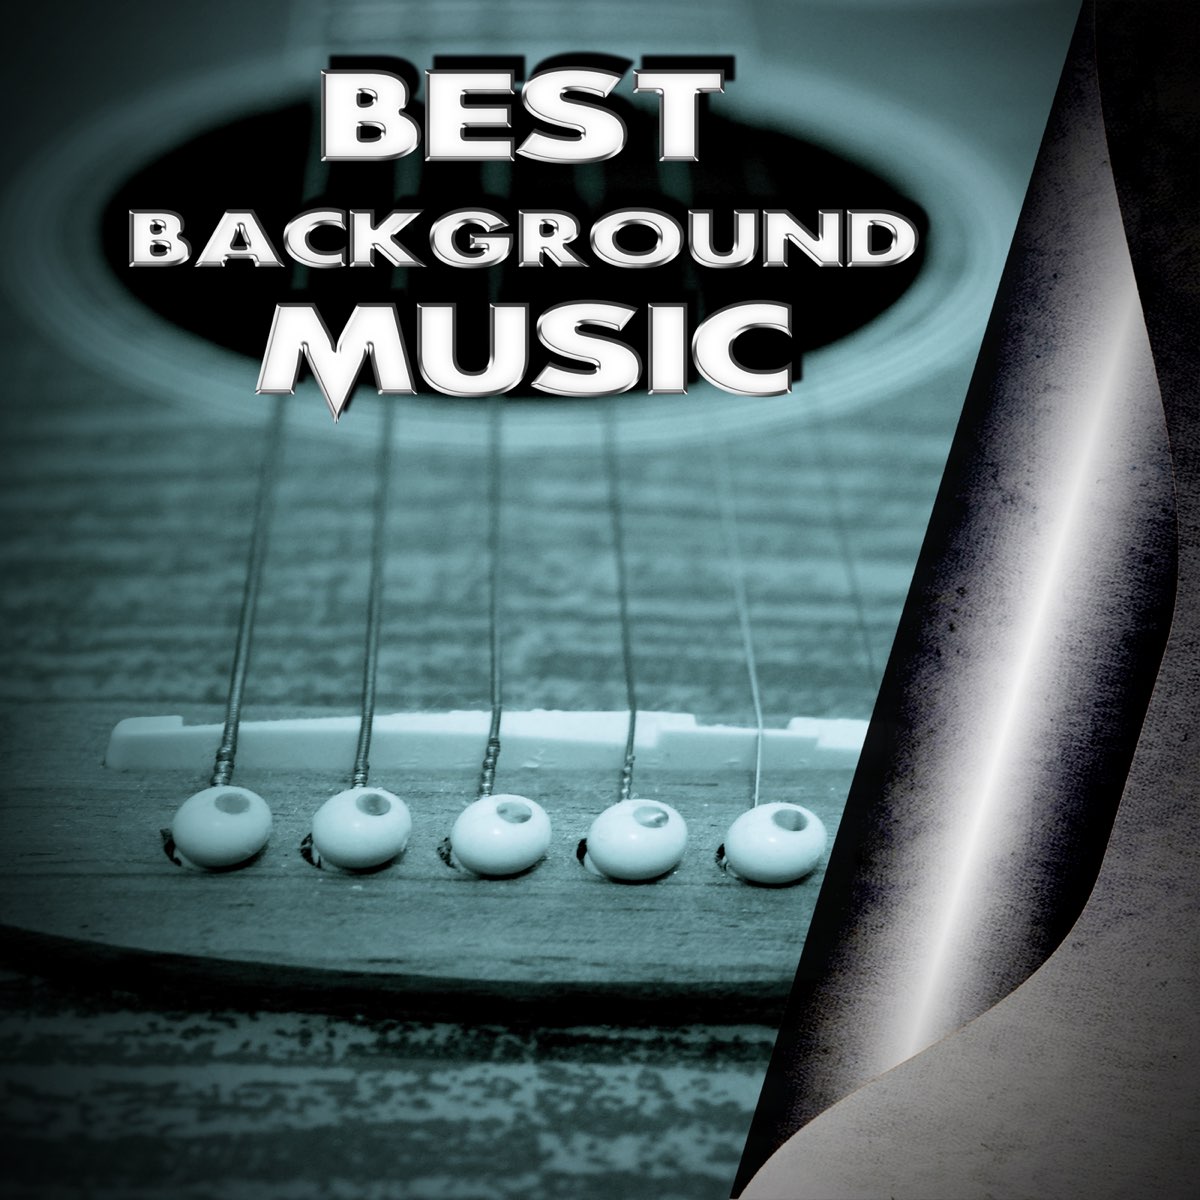 Best Background Music - Acoustic Guitar Music, Relaxing Music to Wind Down,  Study, Relax and Reduce Stress, Restaurant Music, Remarkable Music to Chill  Lounge, Soothing Instrumental Songs by Jazz Guitar Club on